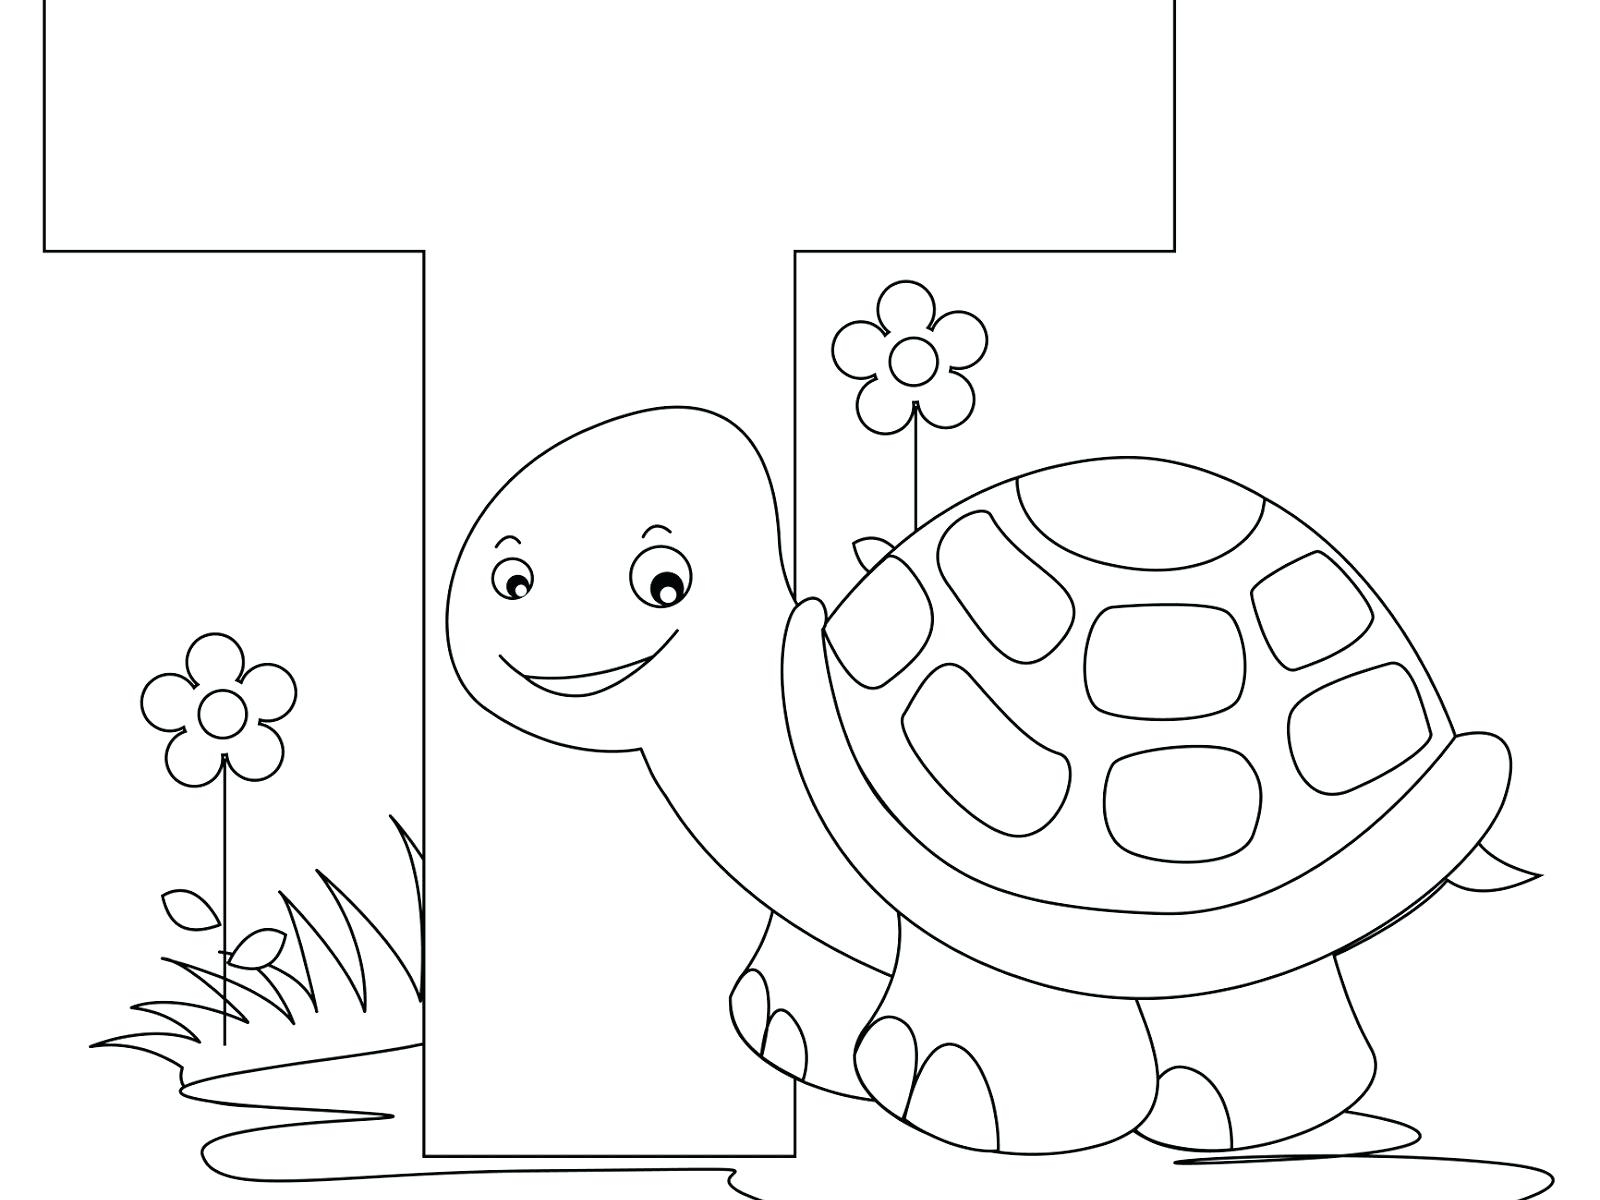 Alphabet Coloring Pages Pdf at GetColorings.com | Free ...